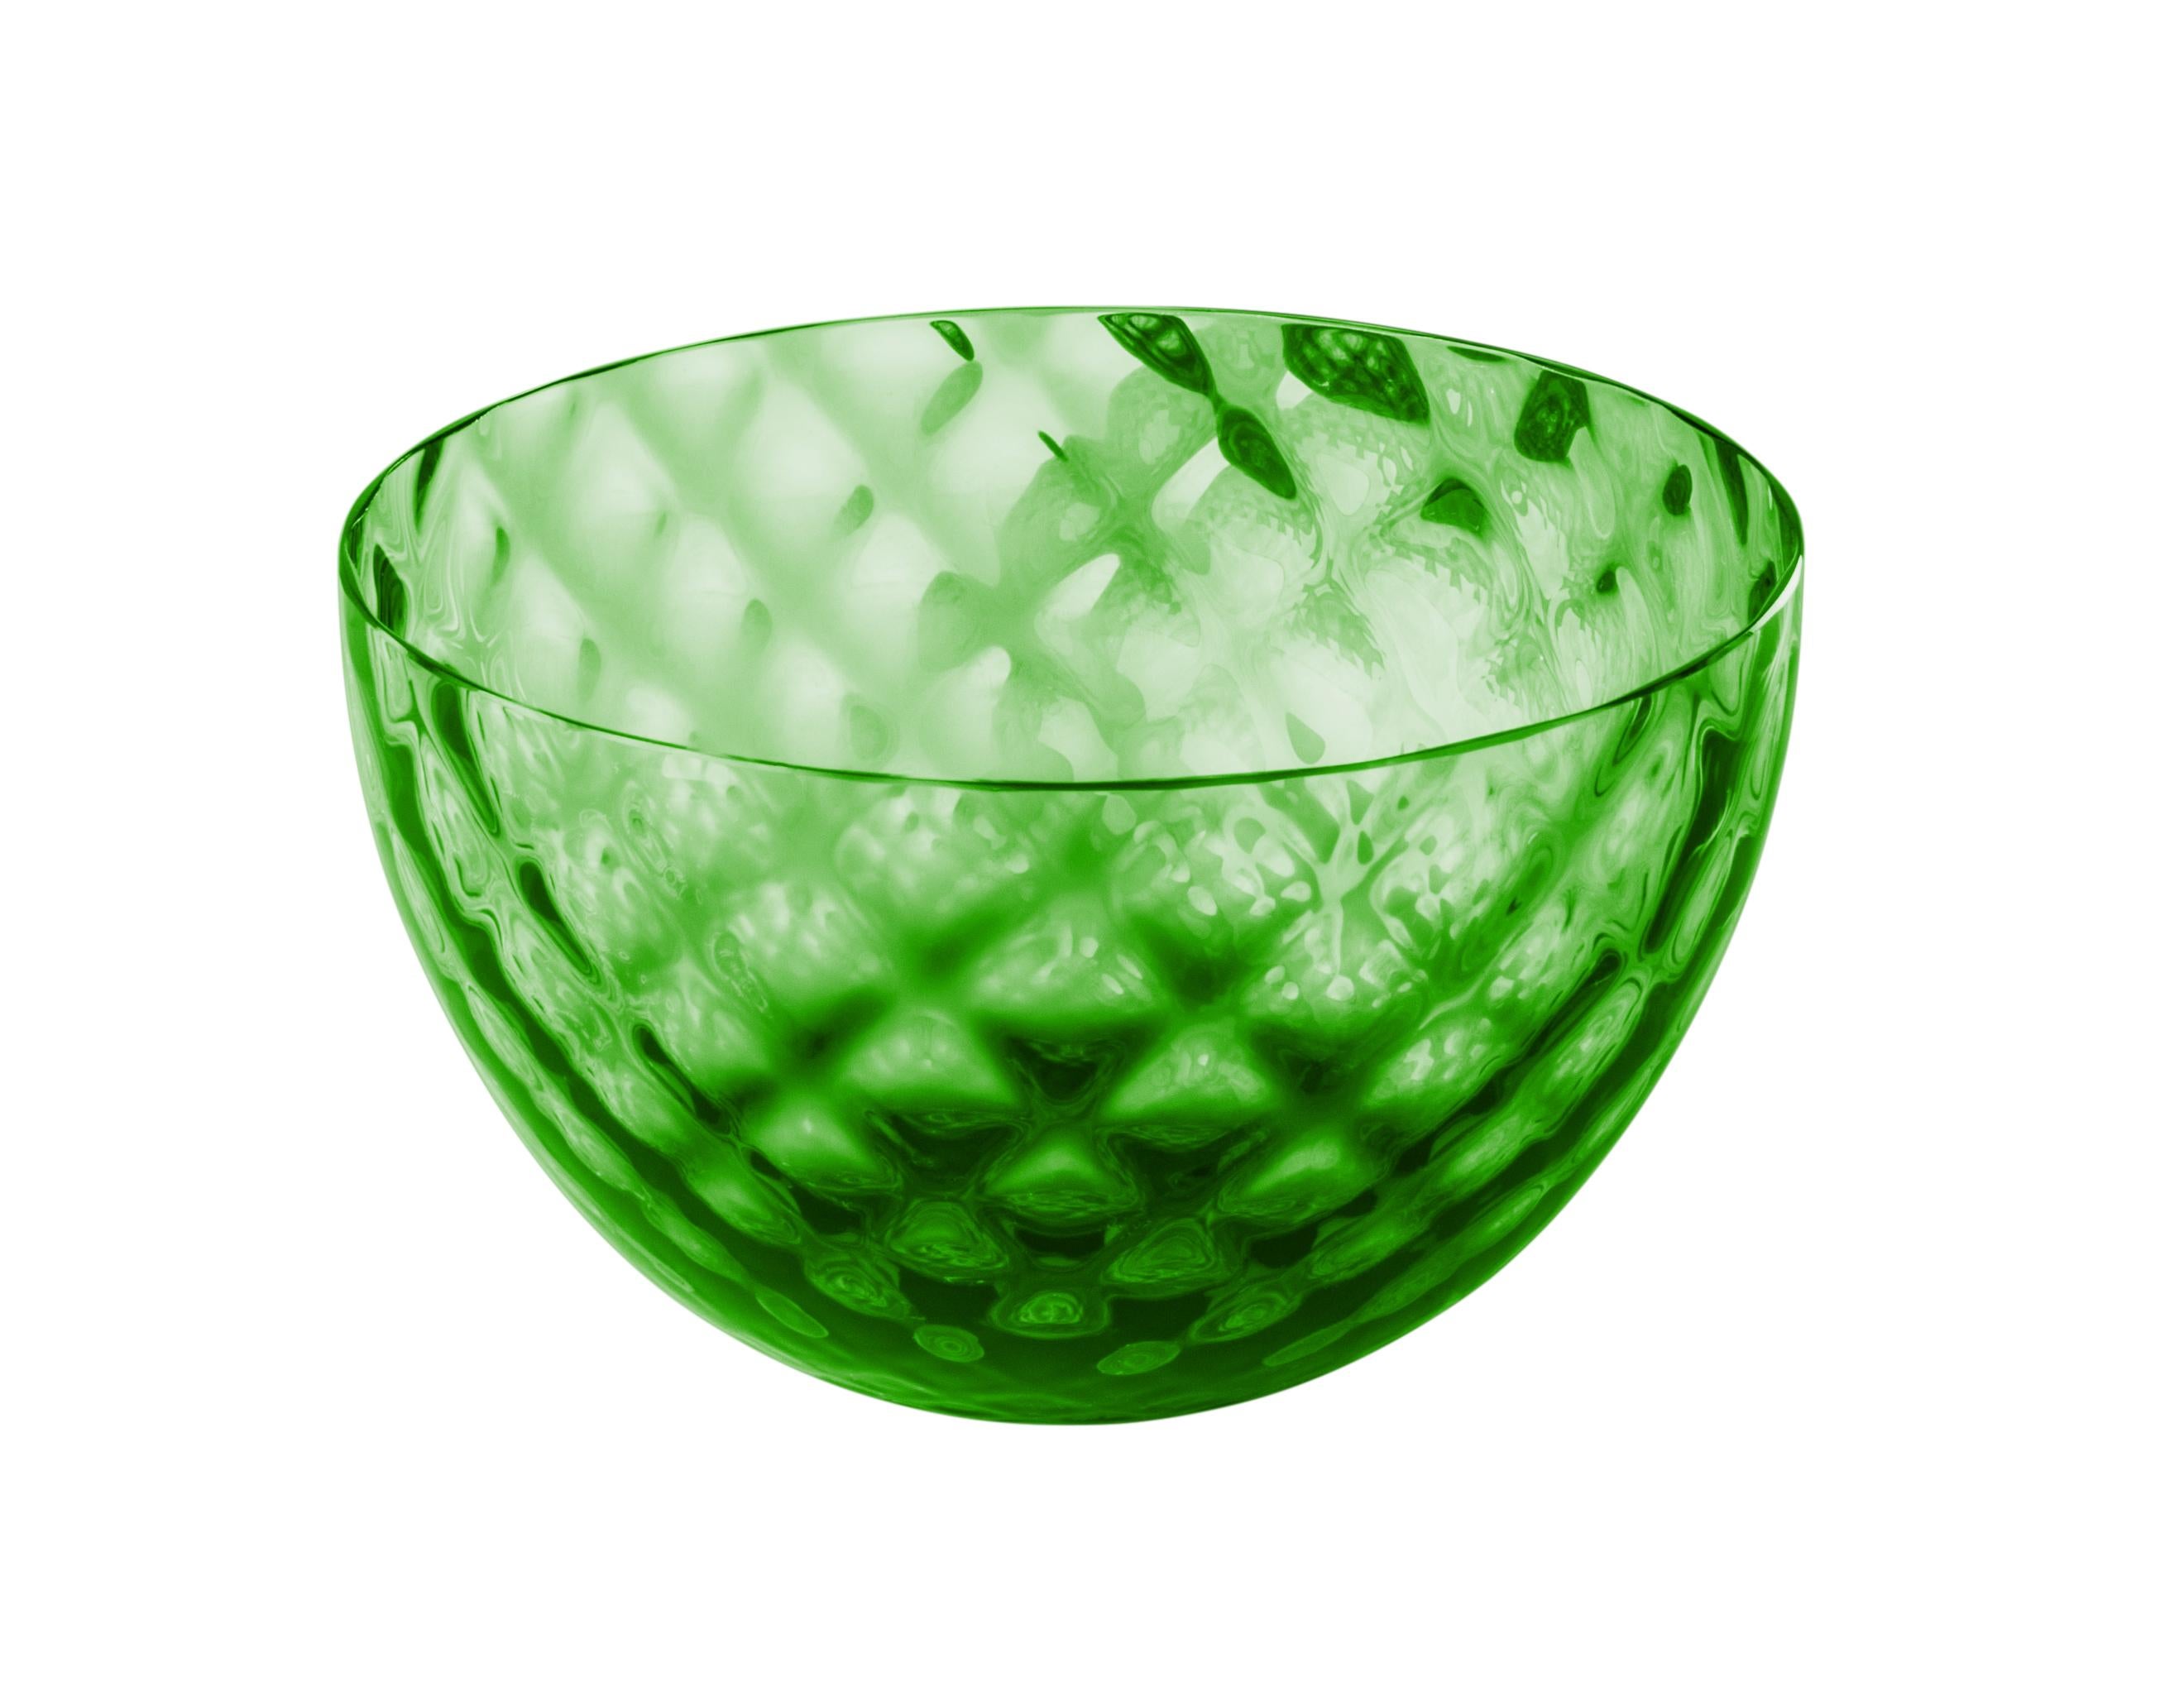 Venini glass bowl in green with geometric textured surface. Perfect for indoor home decor as container, vide-poche or statement piece for any room. Also available in other colors on 1stdibs.

Dimensions: 12 cm diameter x 7 cm height.